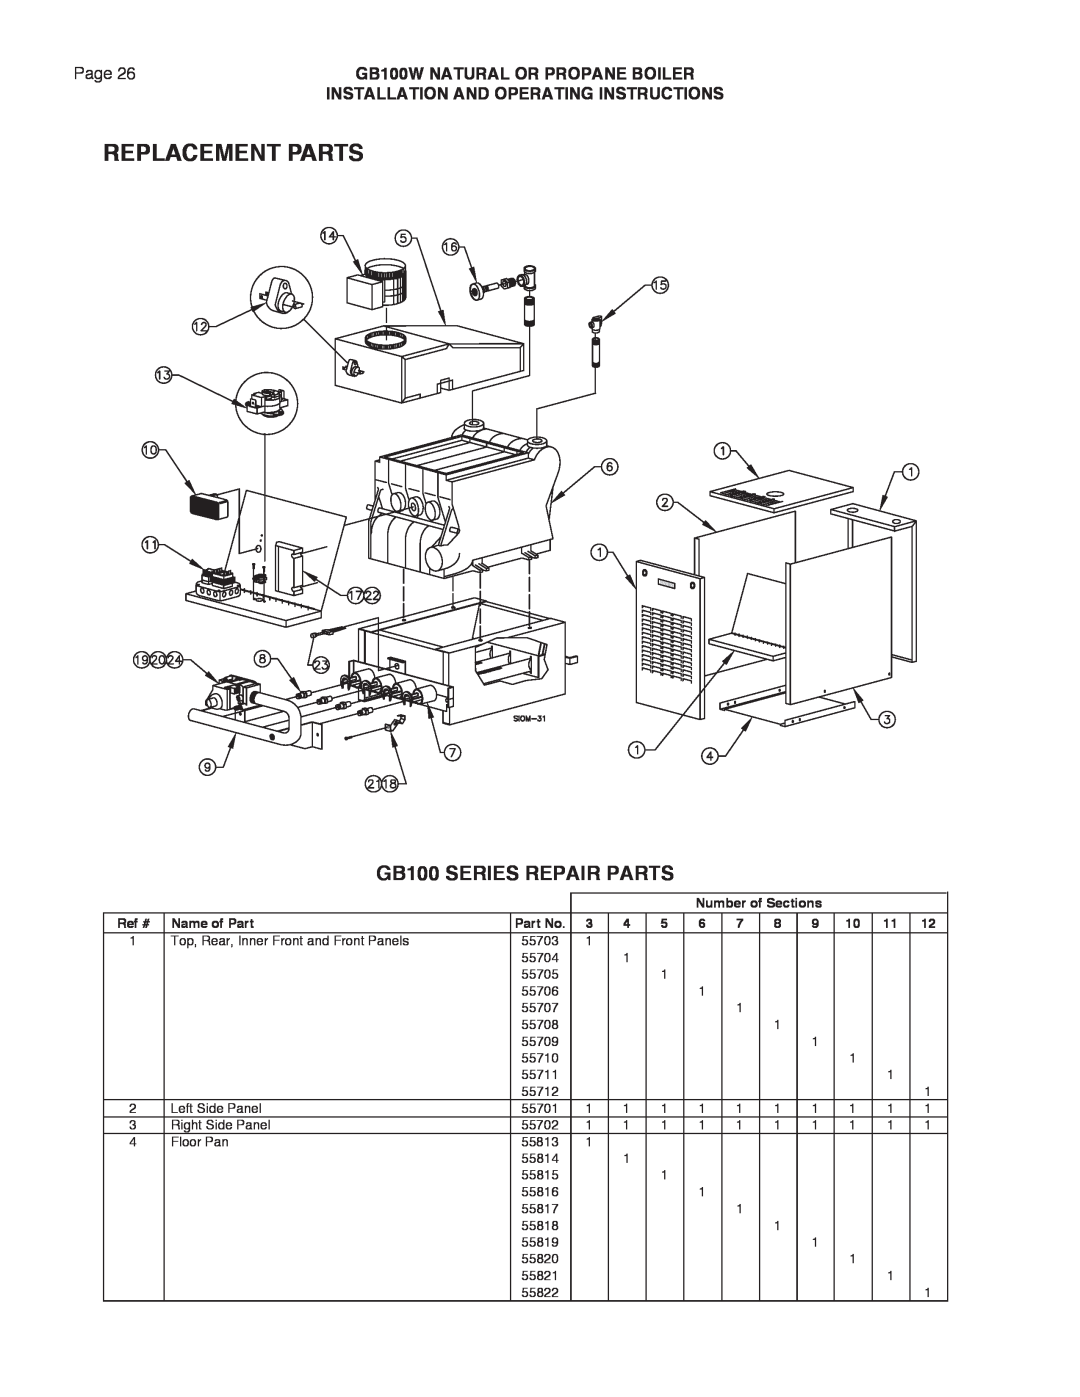 Smith Cast Iron Boilers manual Replacement Parts, GB100 SERIES REPAIR PARTS, Page, GB100W NATURAL OR PROPANE BOILER 